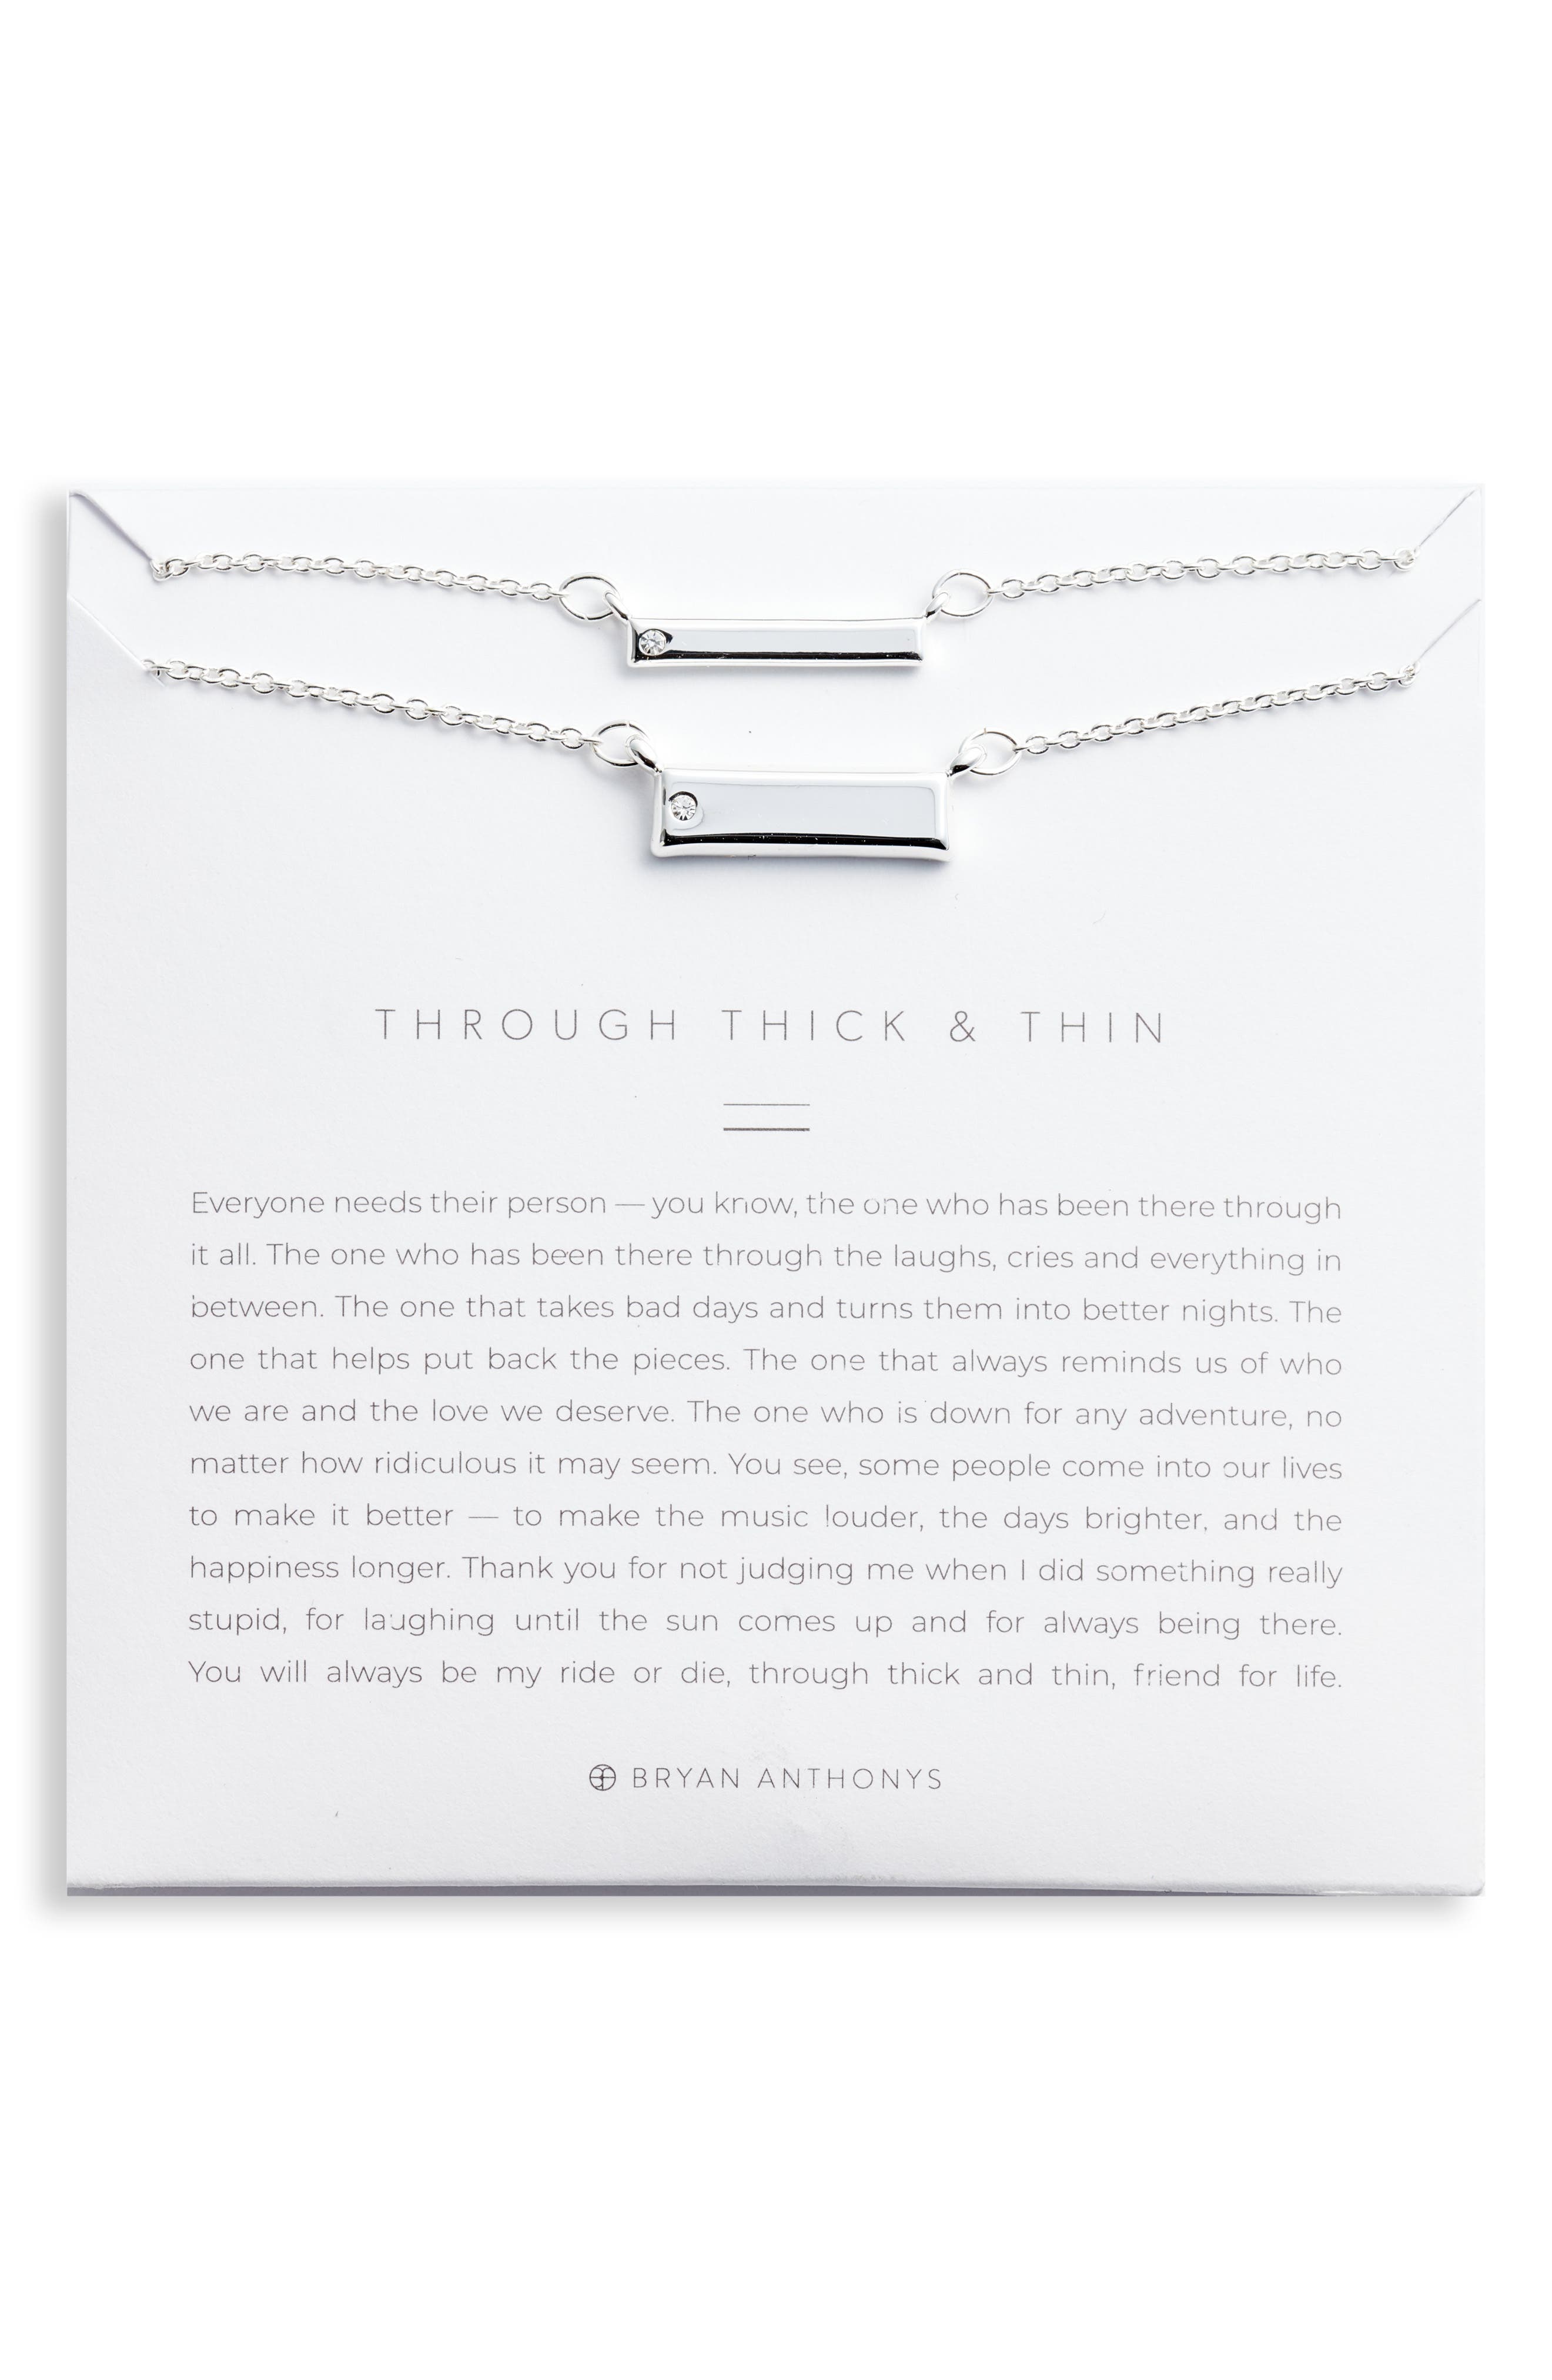 Bryan Anthonys Through Thick & Thin Necklace Set in Silver at Nordstrom